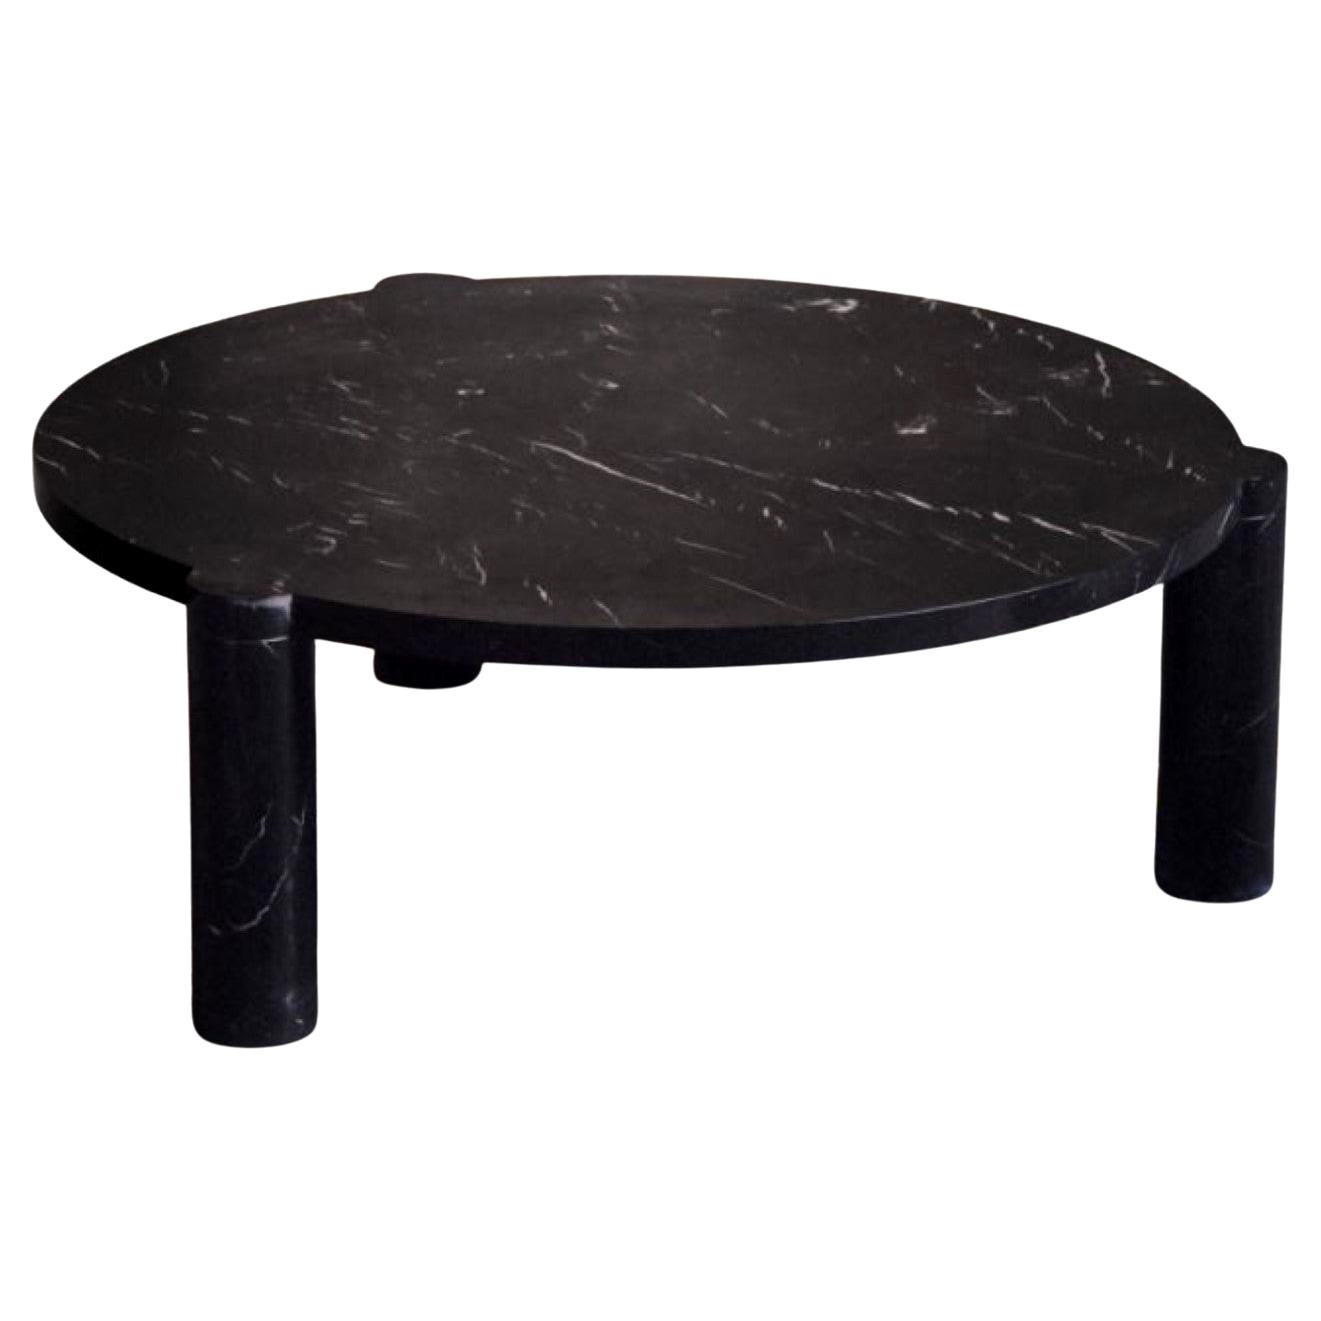 Black Marquina Marble Alexis 90 Coffee Table by Agglomerati